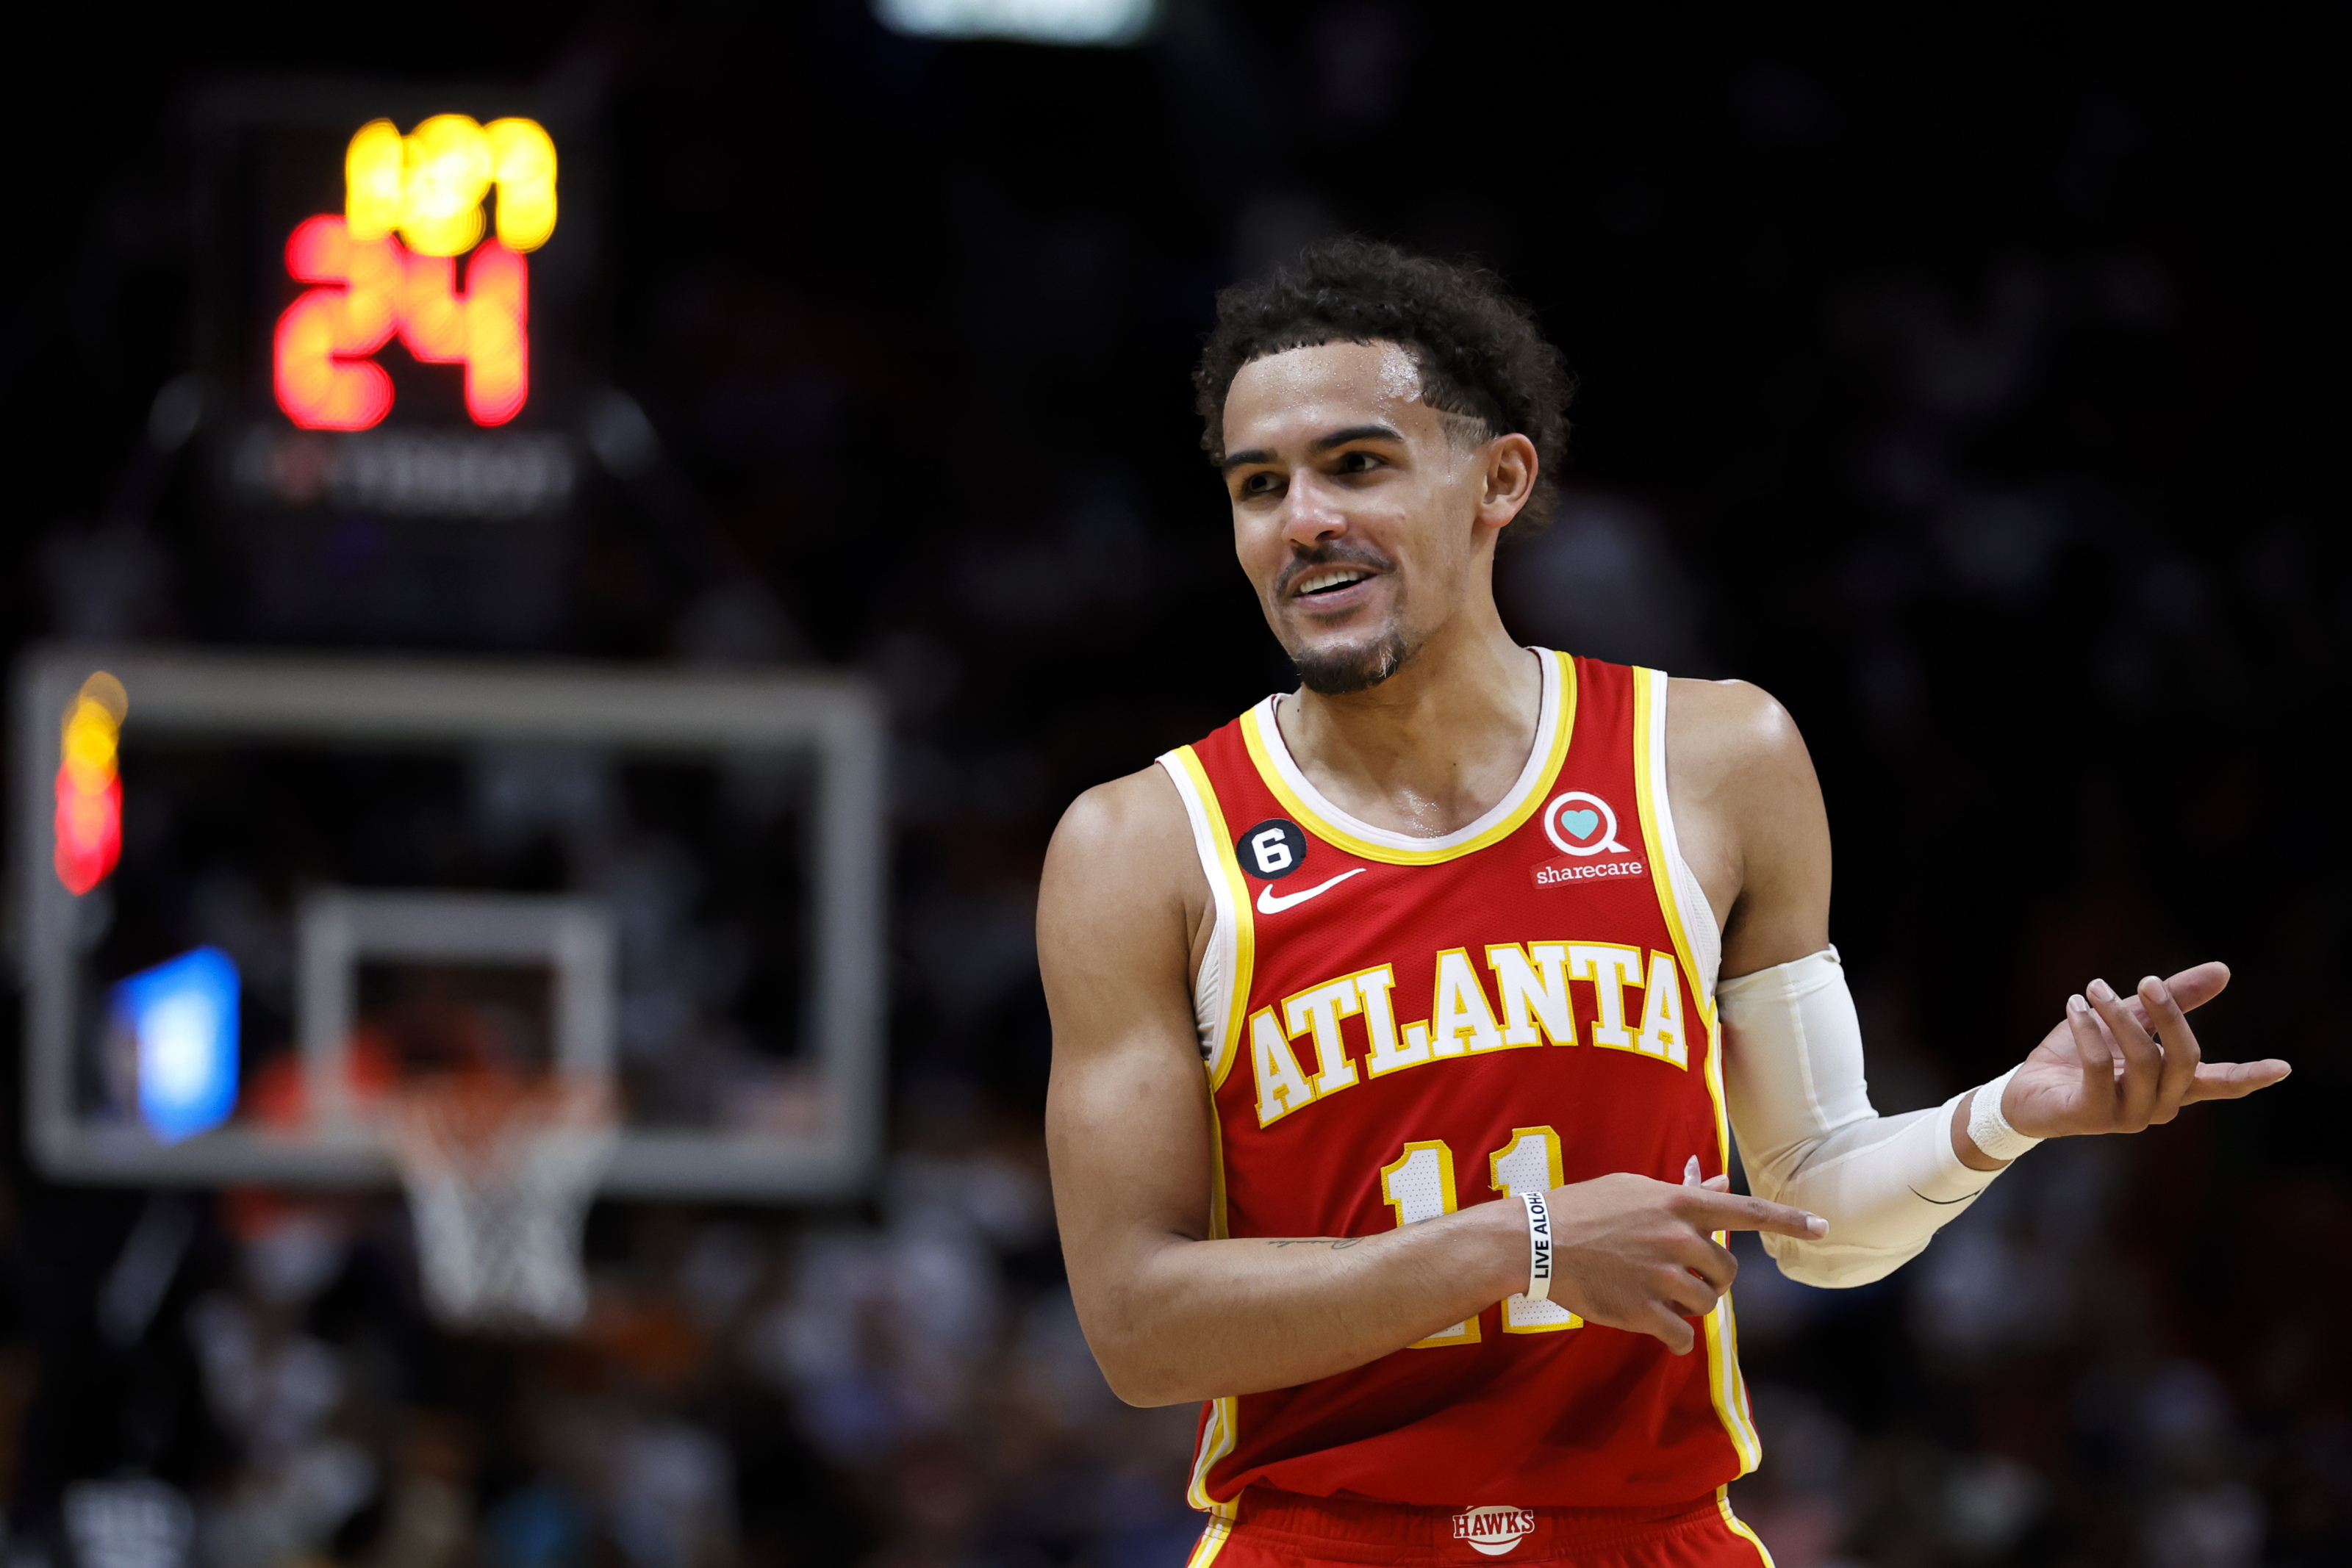 Trae Young Responds to Image of Cam Reddish in Lakers Jersey